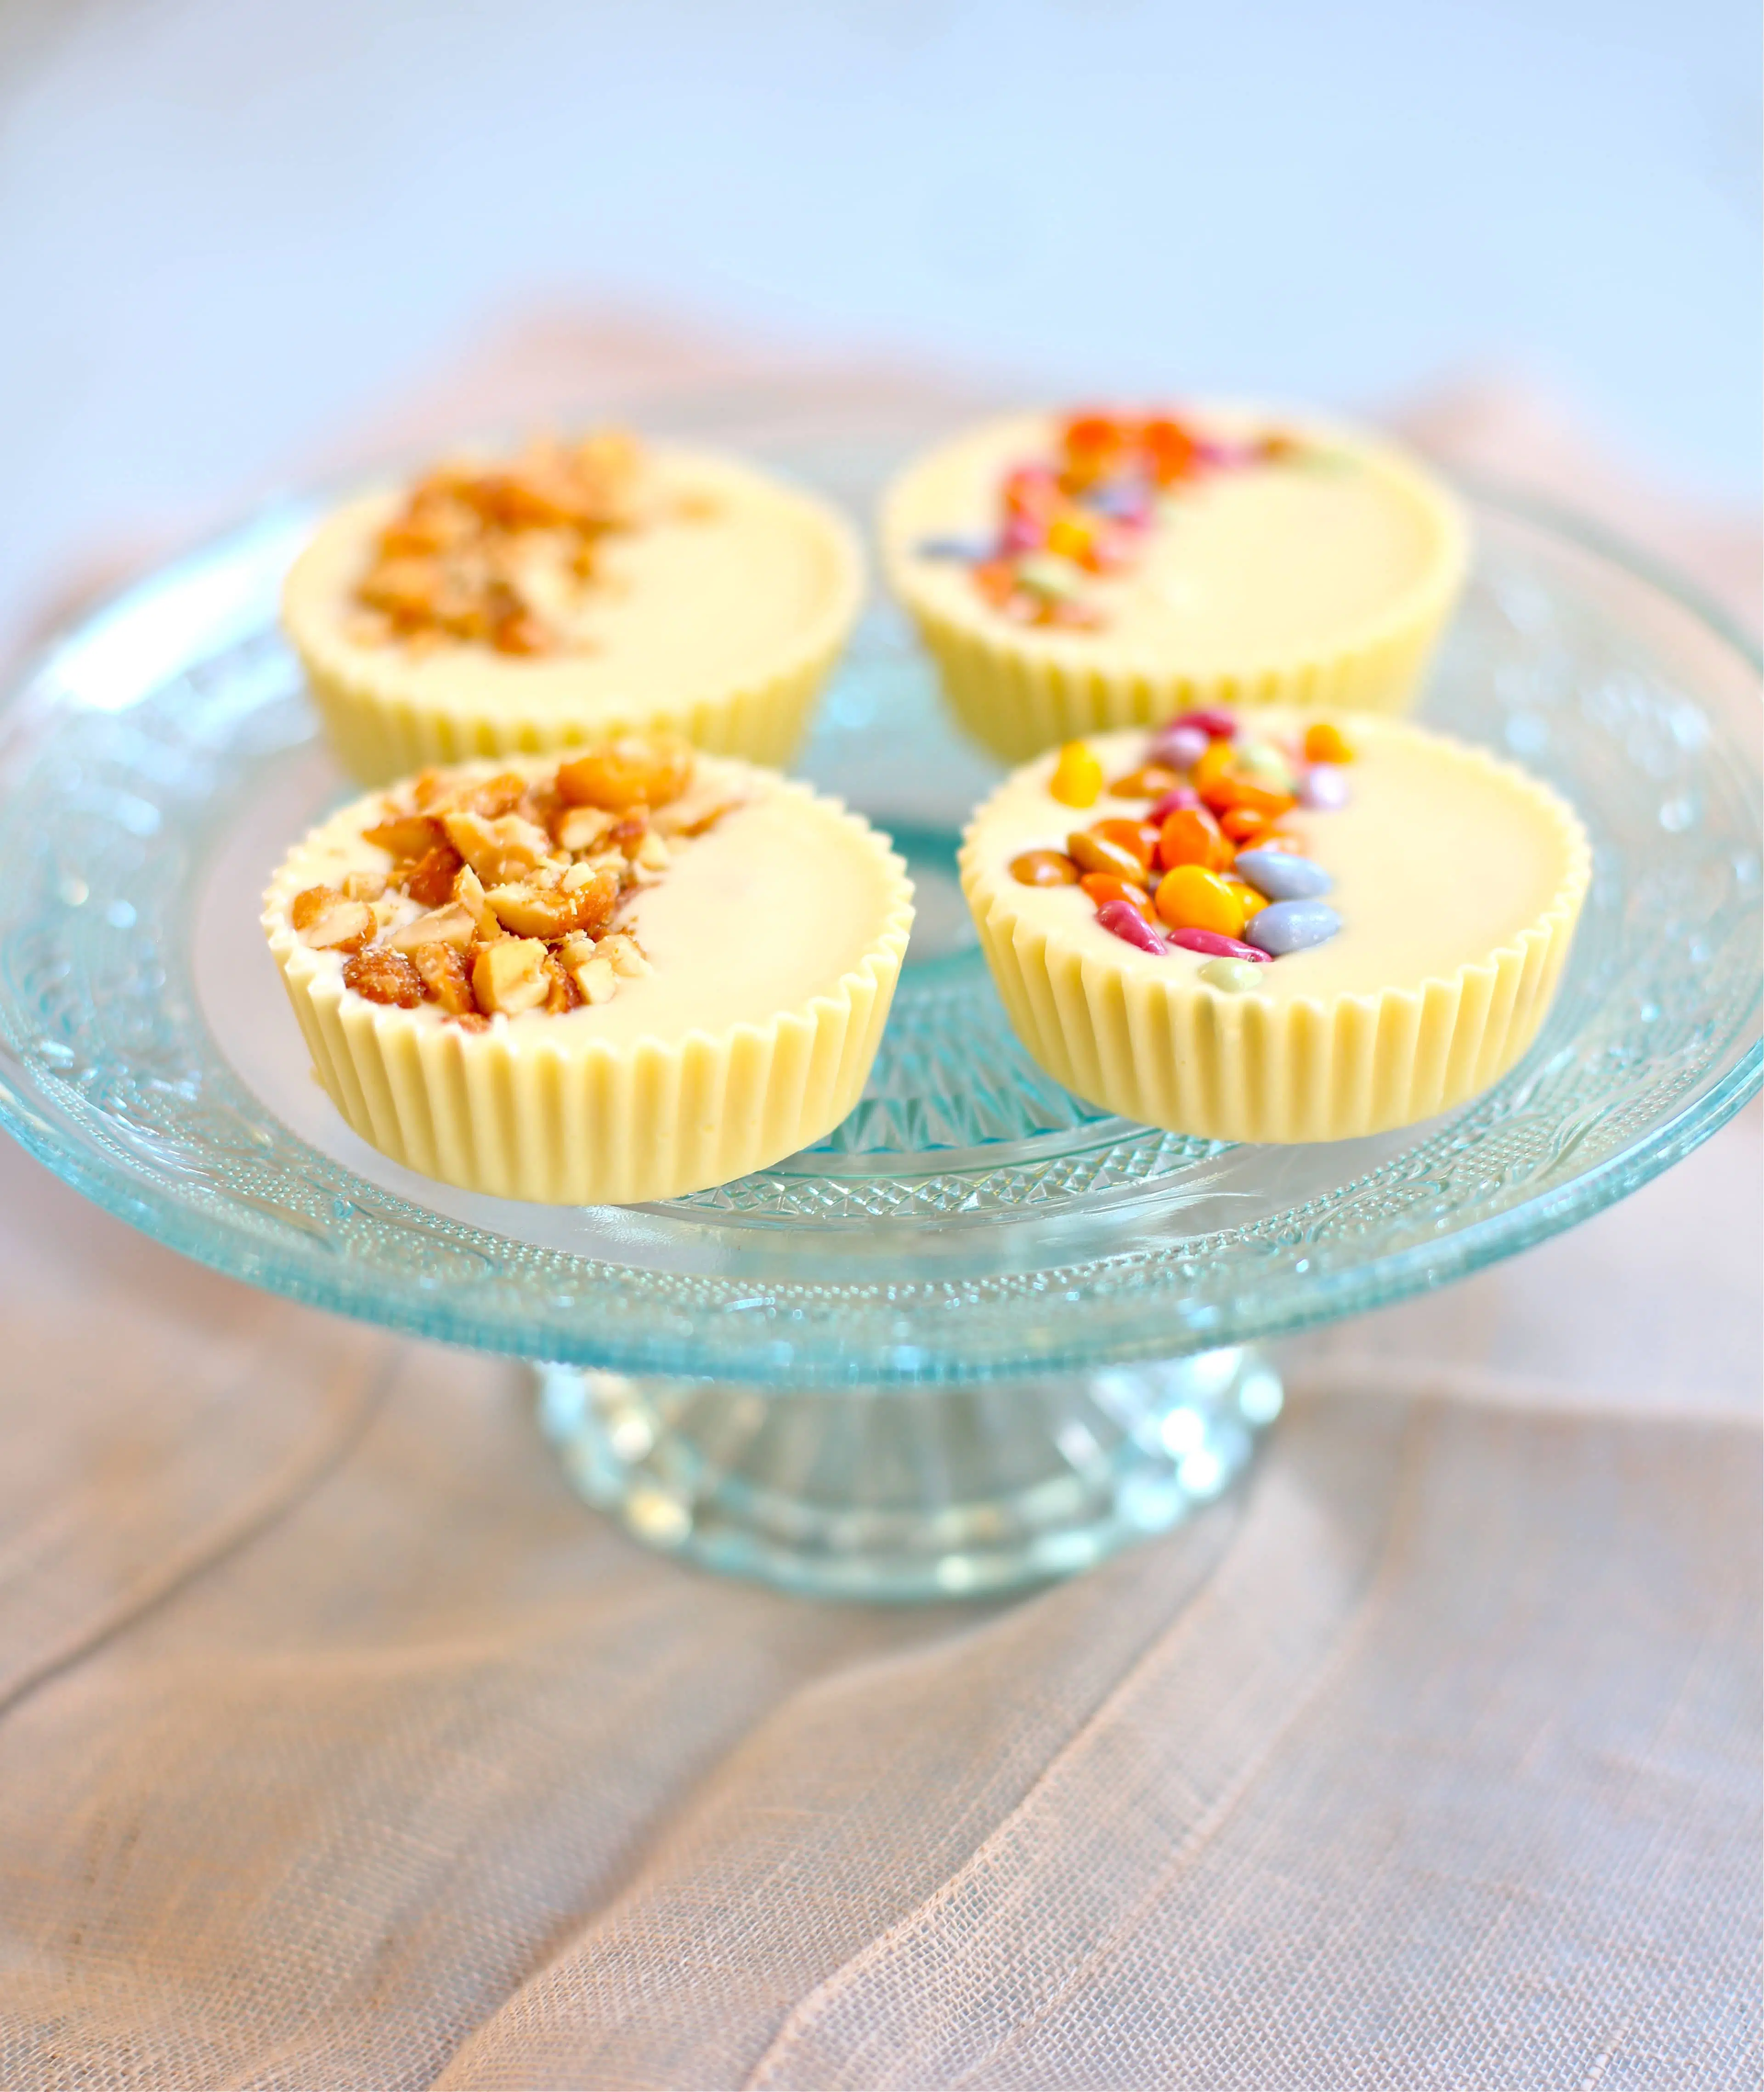 Four white chocolate peanut butter cups with candied topping and peanut topping